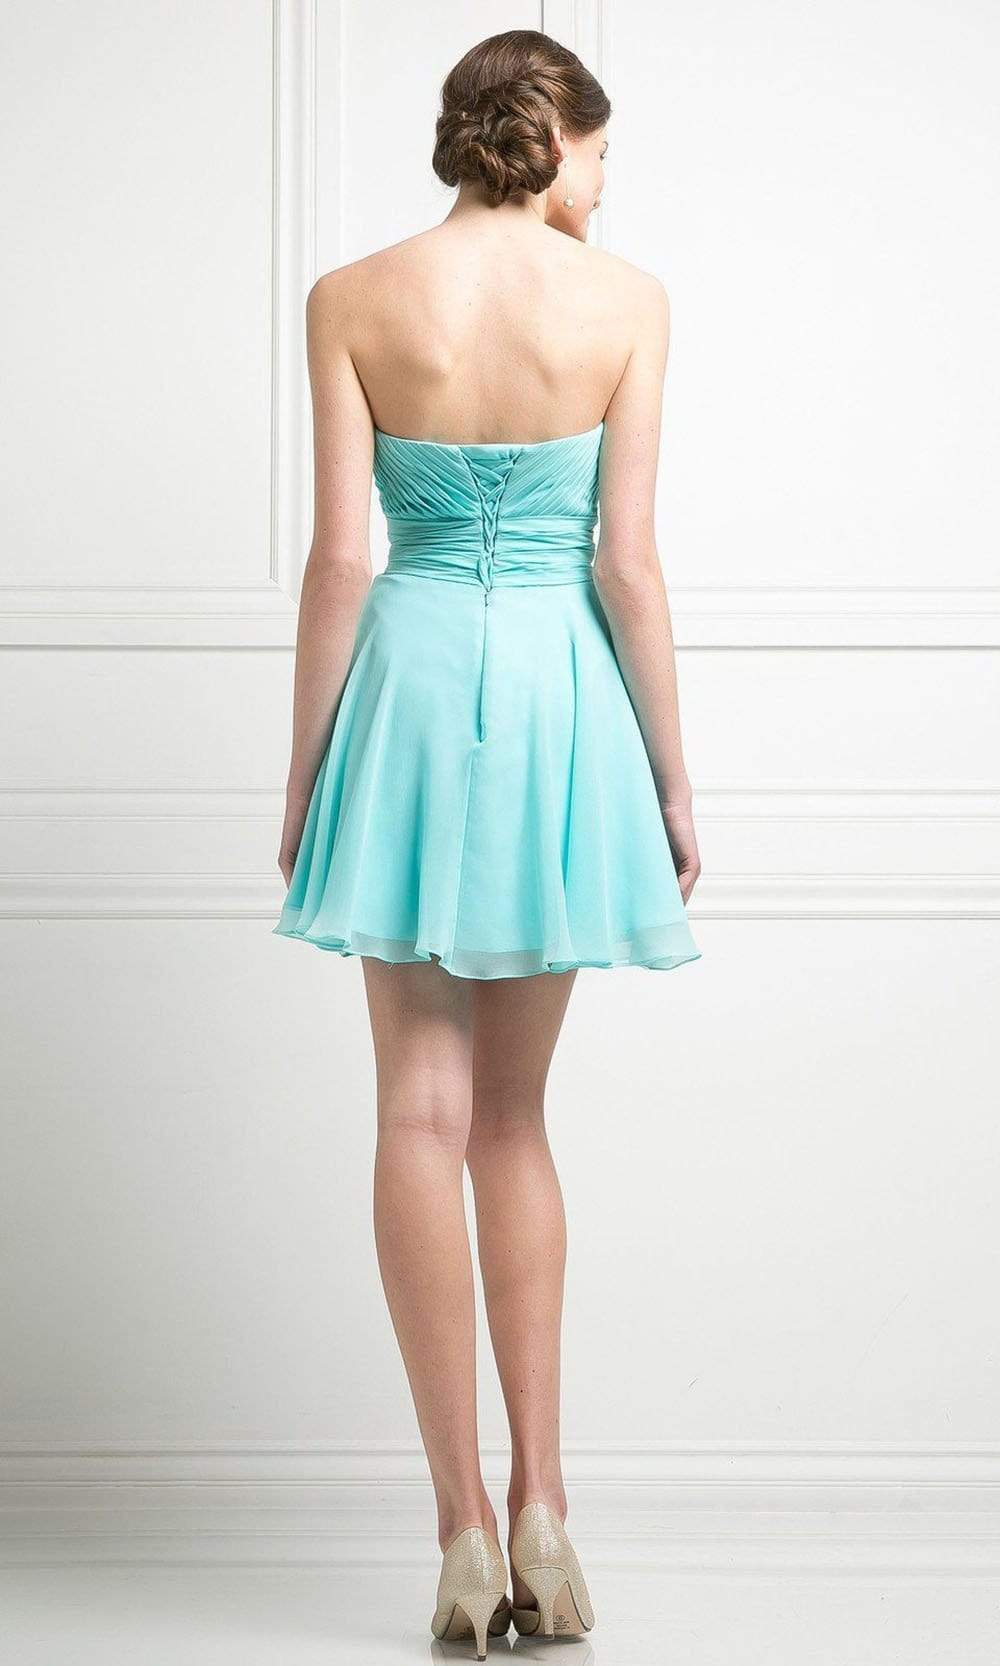 Cinderella Divine - CJ216S Rosette Pleated Sweetheart Chiffon Cocktail Dress Special Occasion Dress